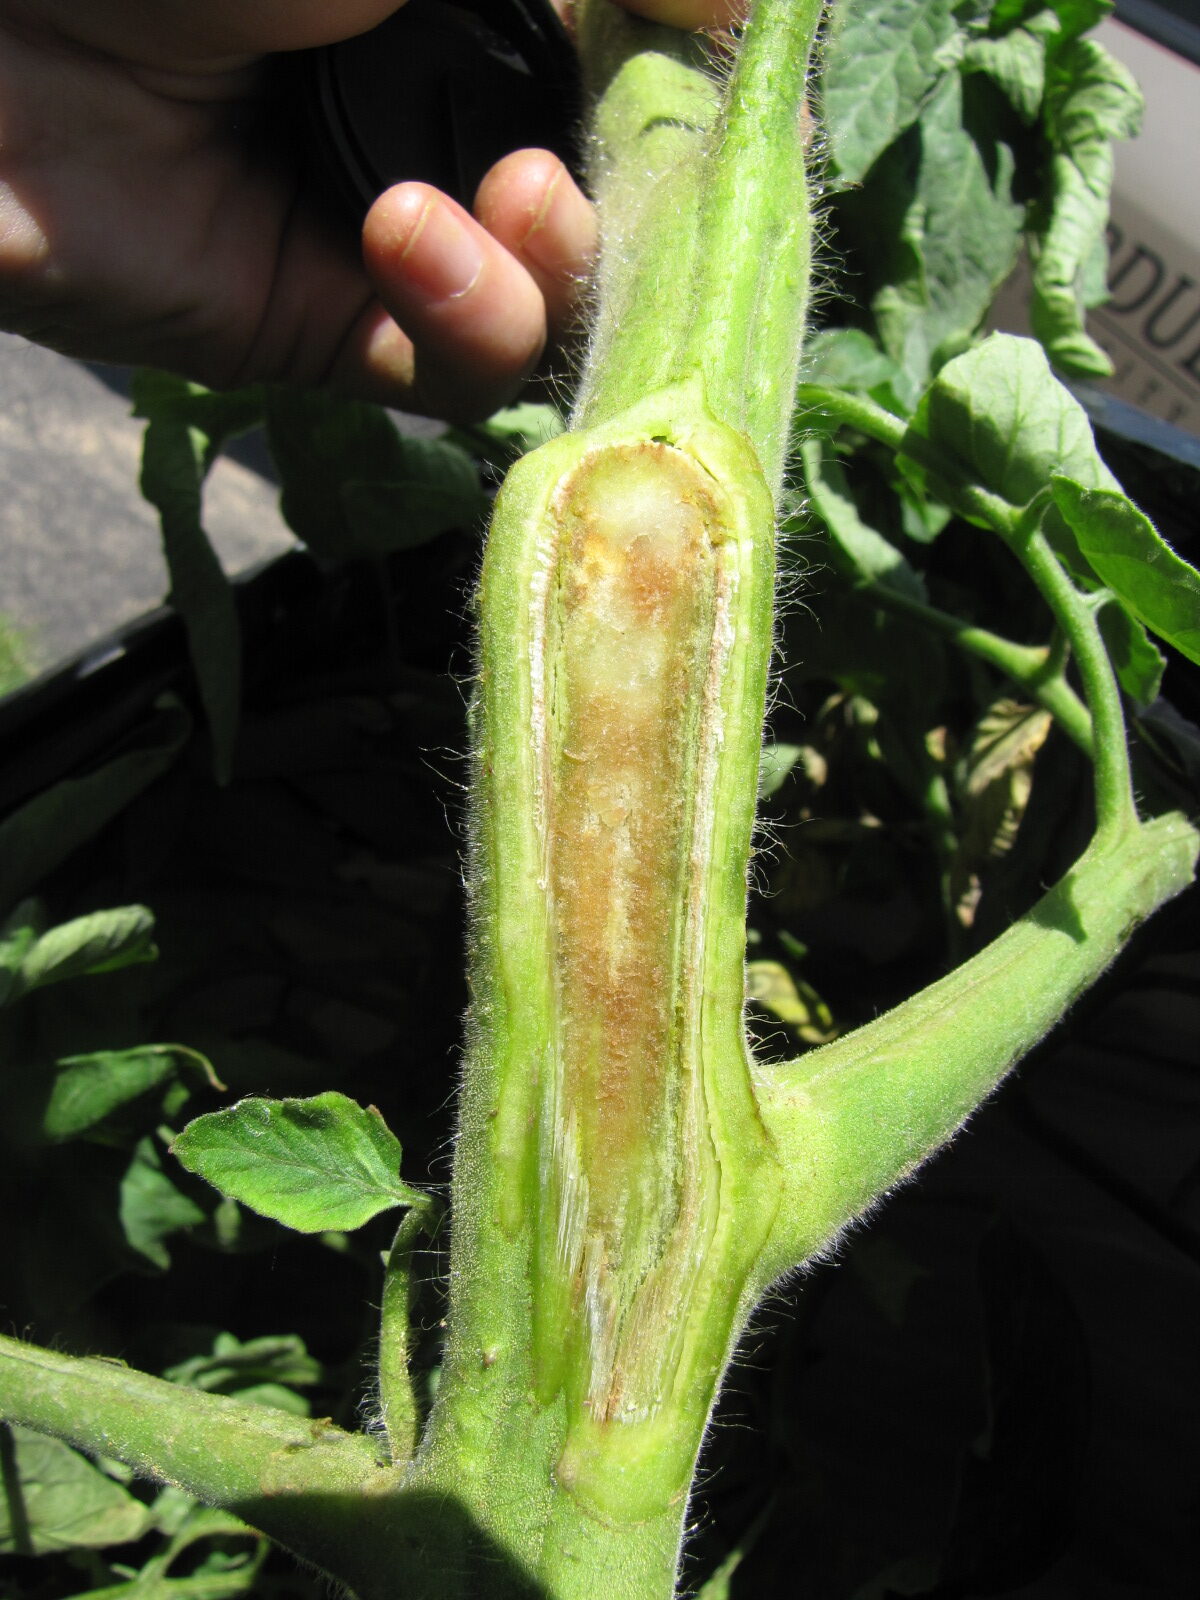 Vascular discoloration of tomato stem due to bacterial canker. This symptoms indicates that the infection is systemic.